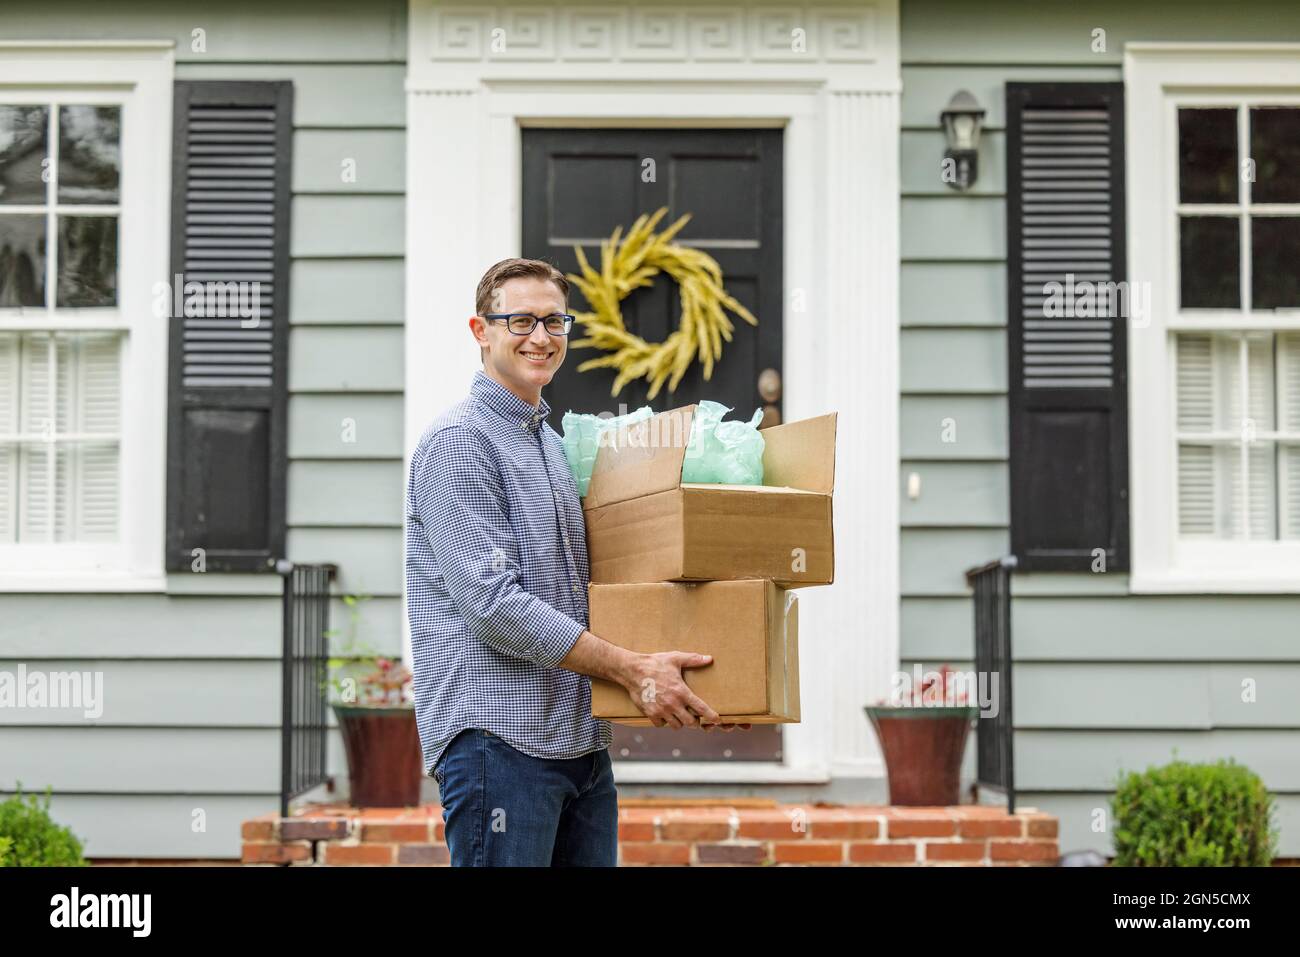 A man and father holding moving boxes outside a small blue cottage house getting ready to move into his new house Stock Photo